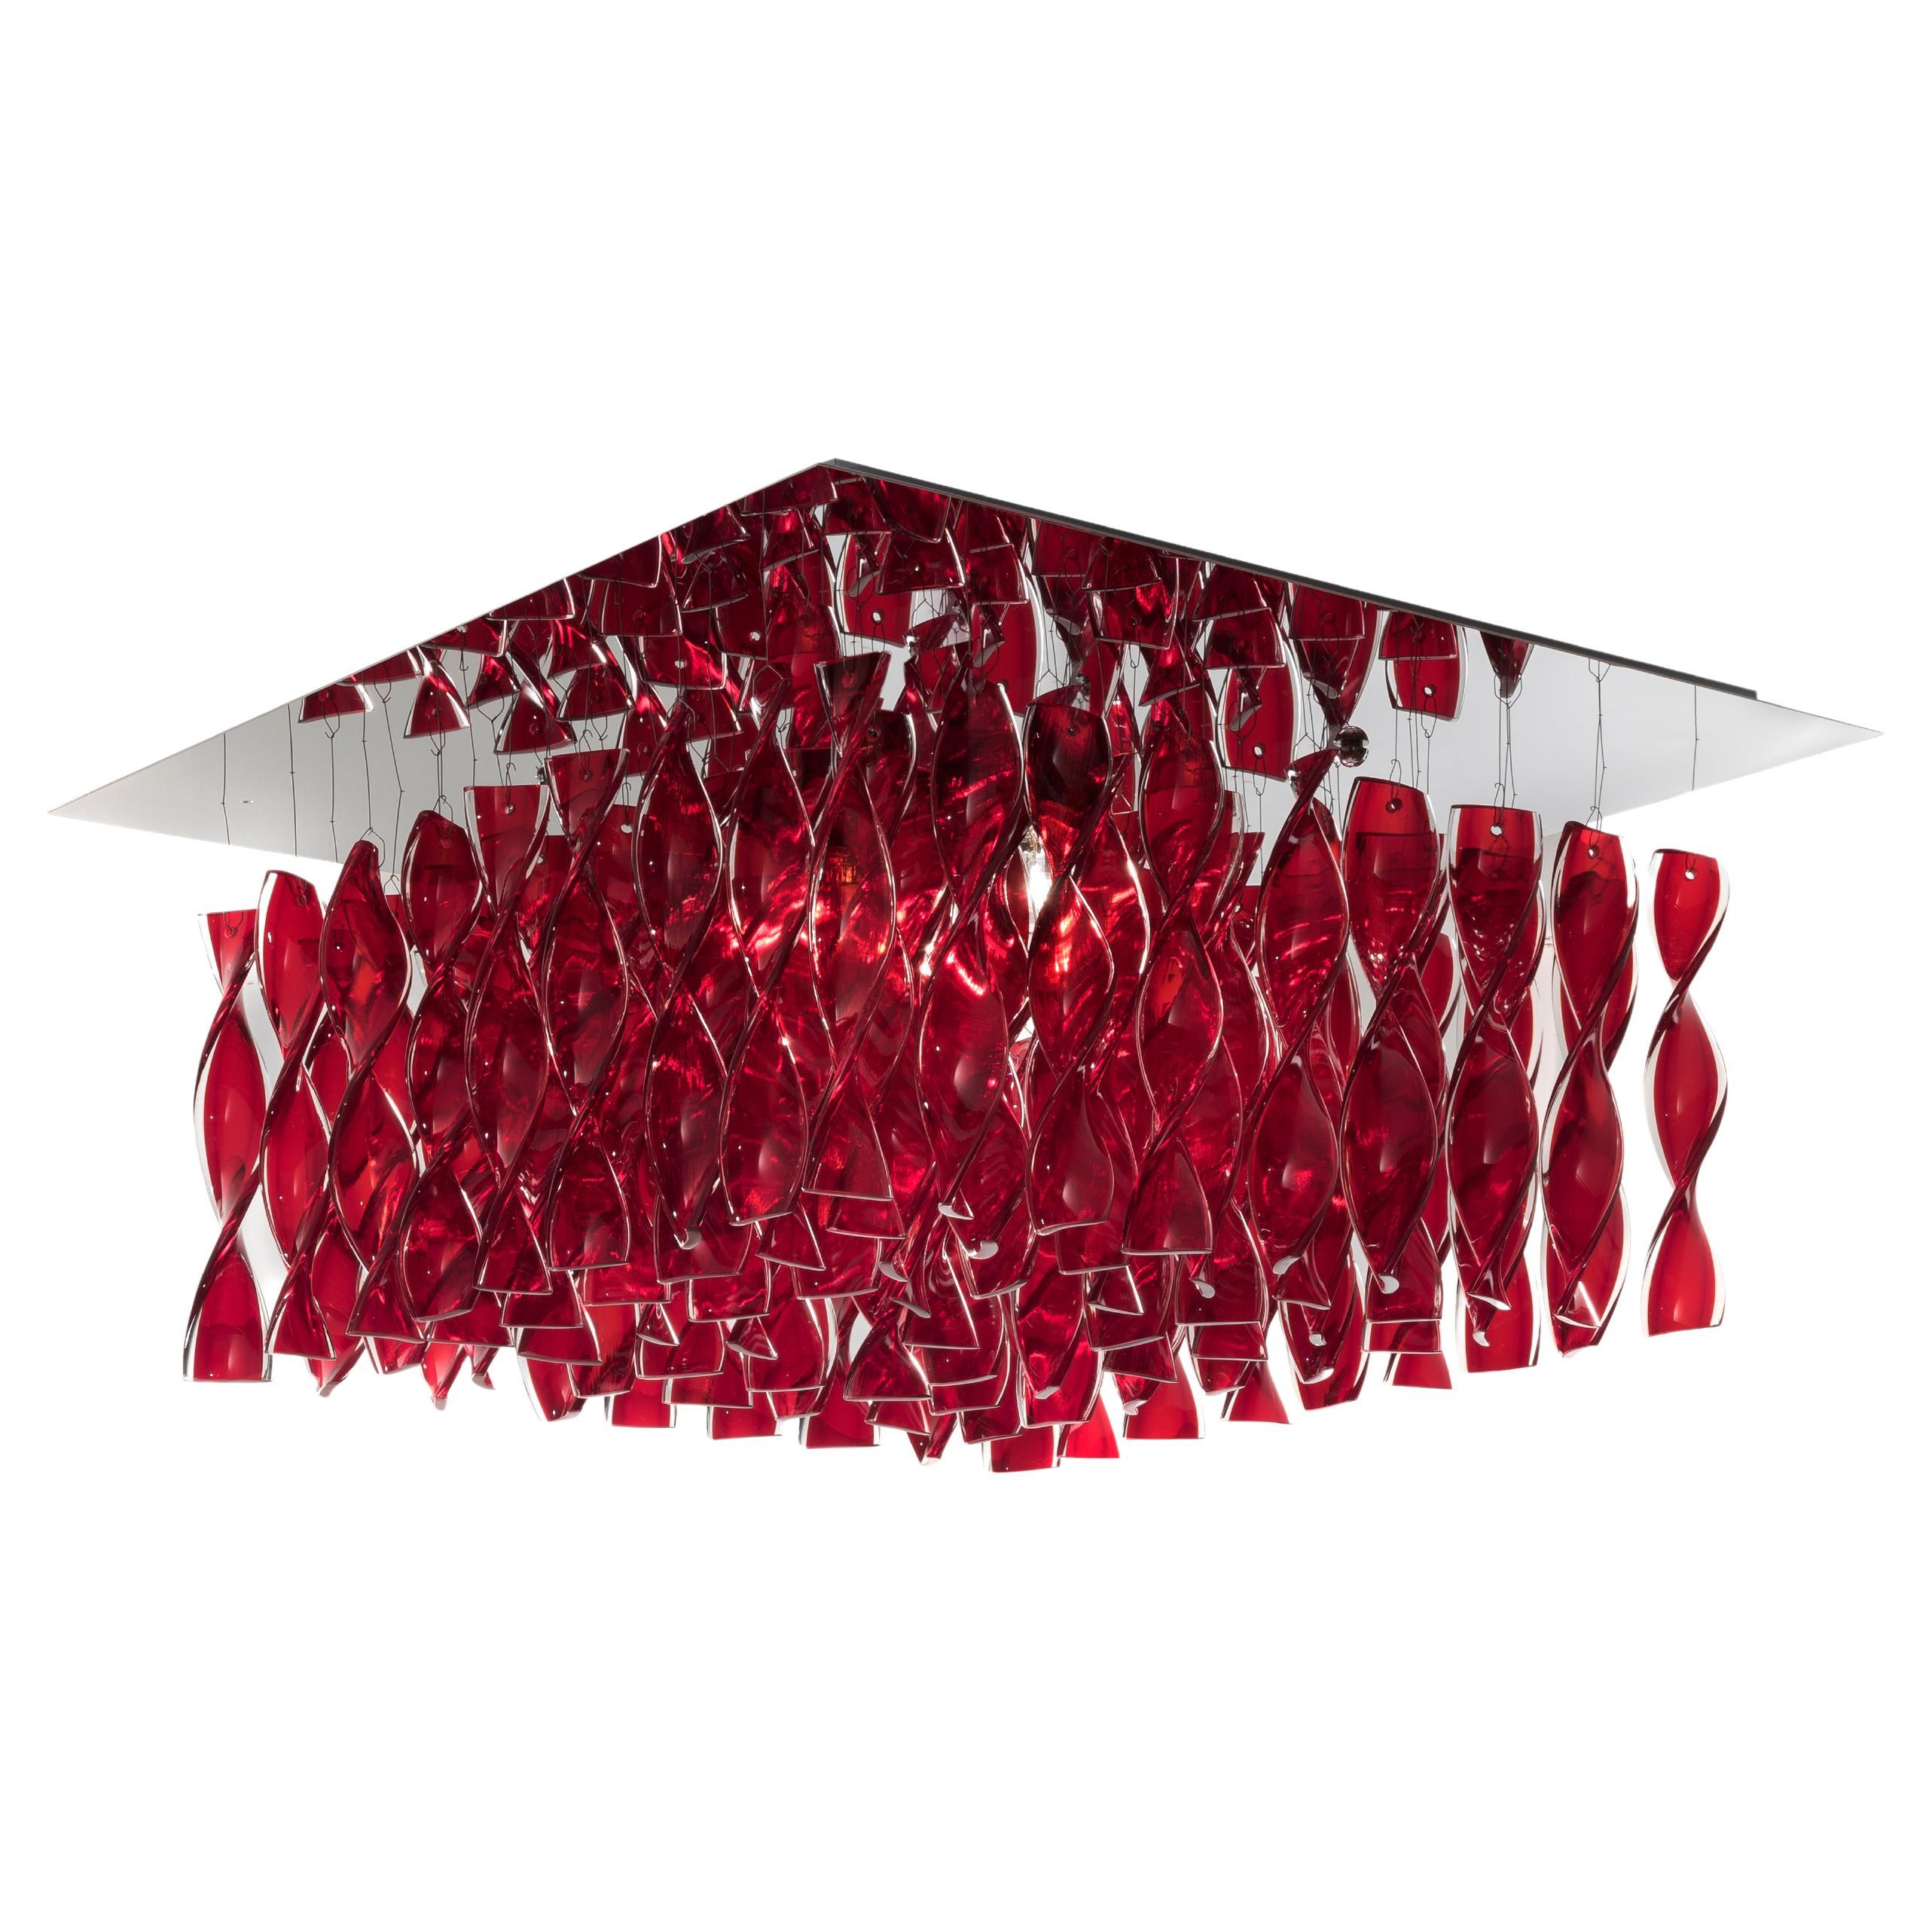 Axolight Avir Medium Ceiling Lamp in Chrome and Red by Manuel & Vanessa Vivian For Sale